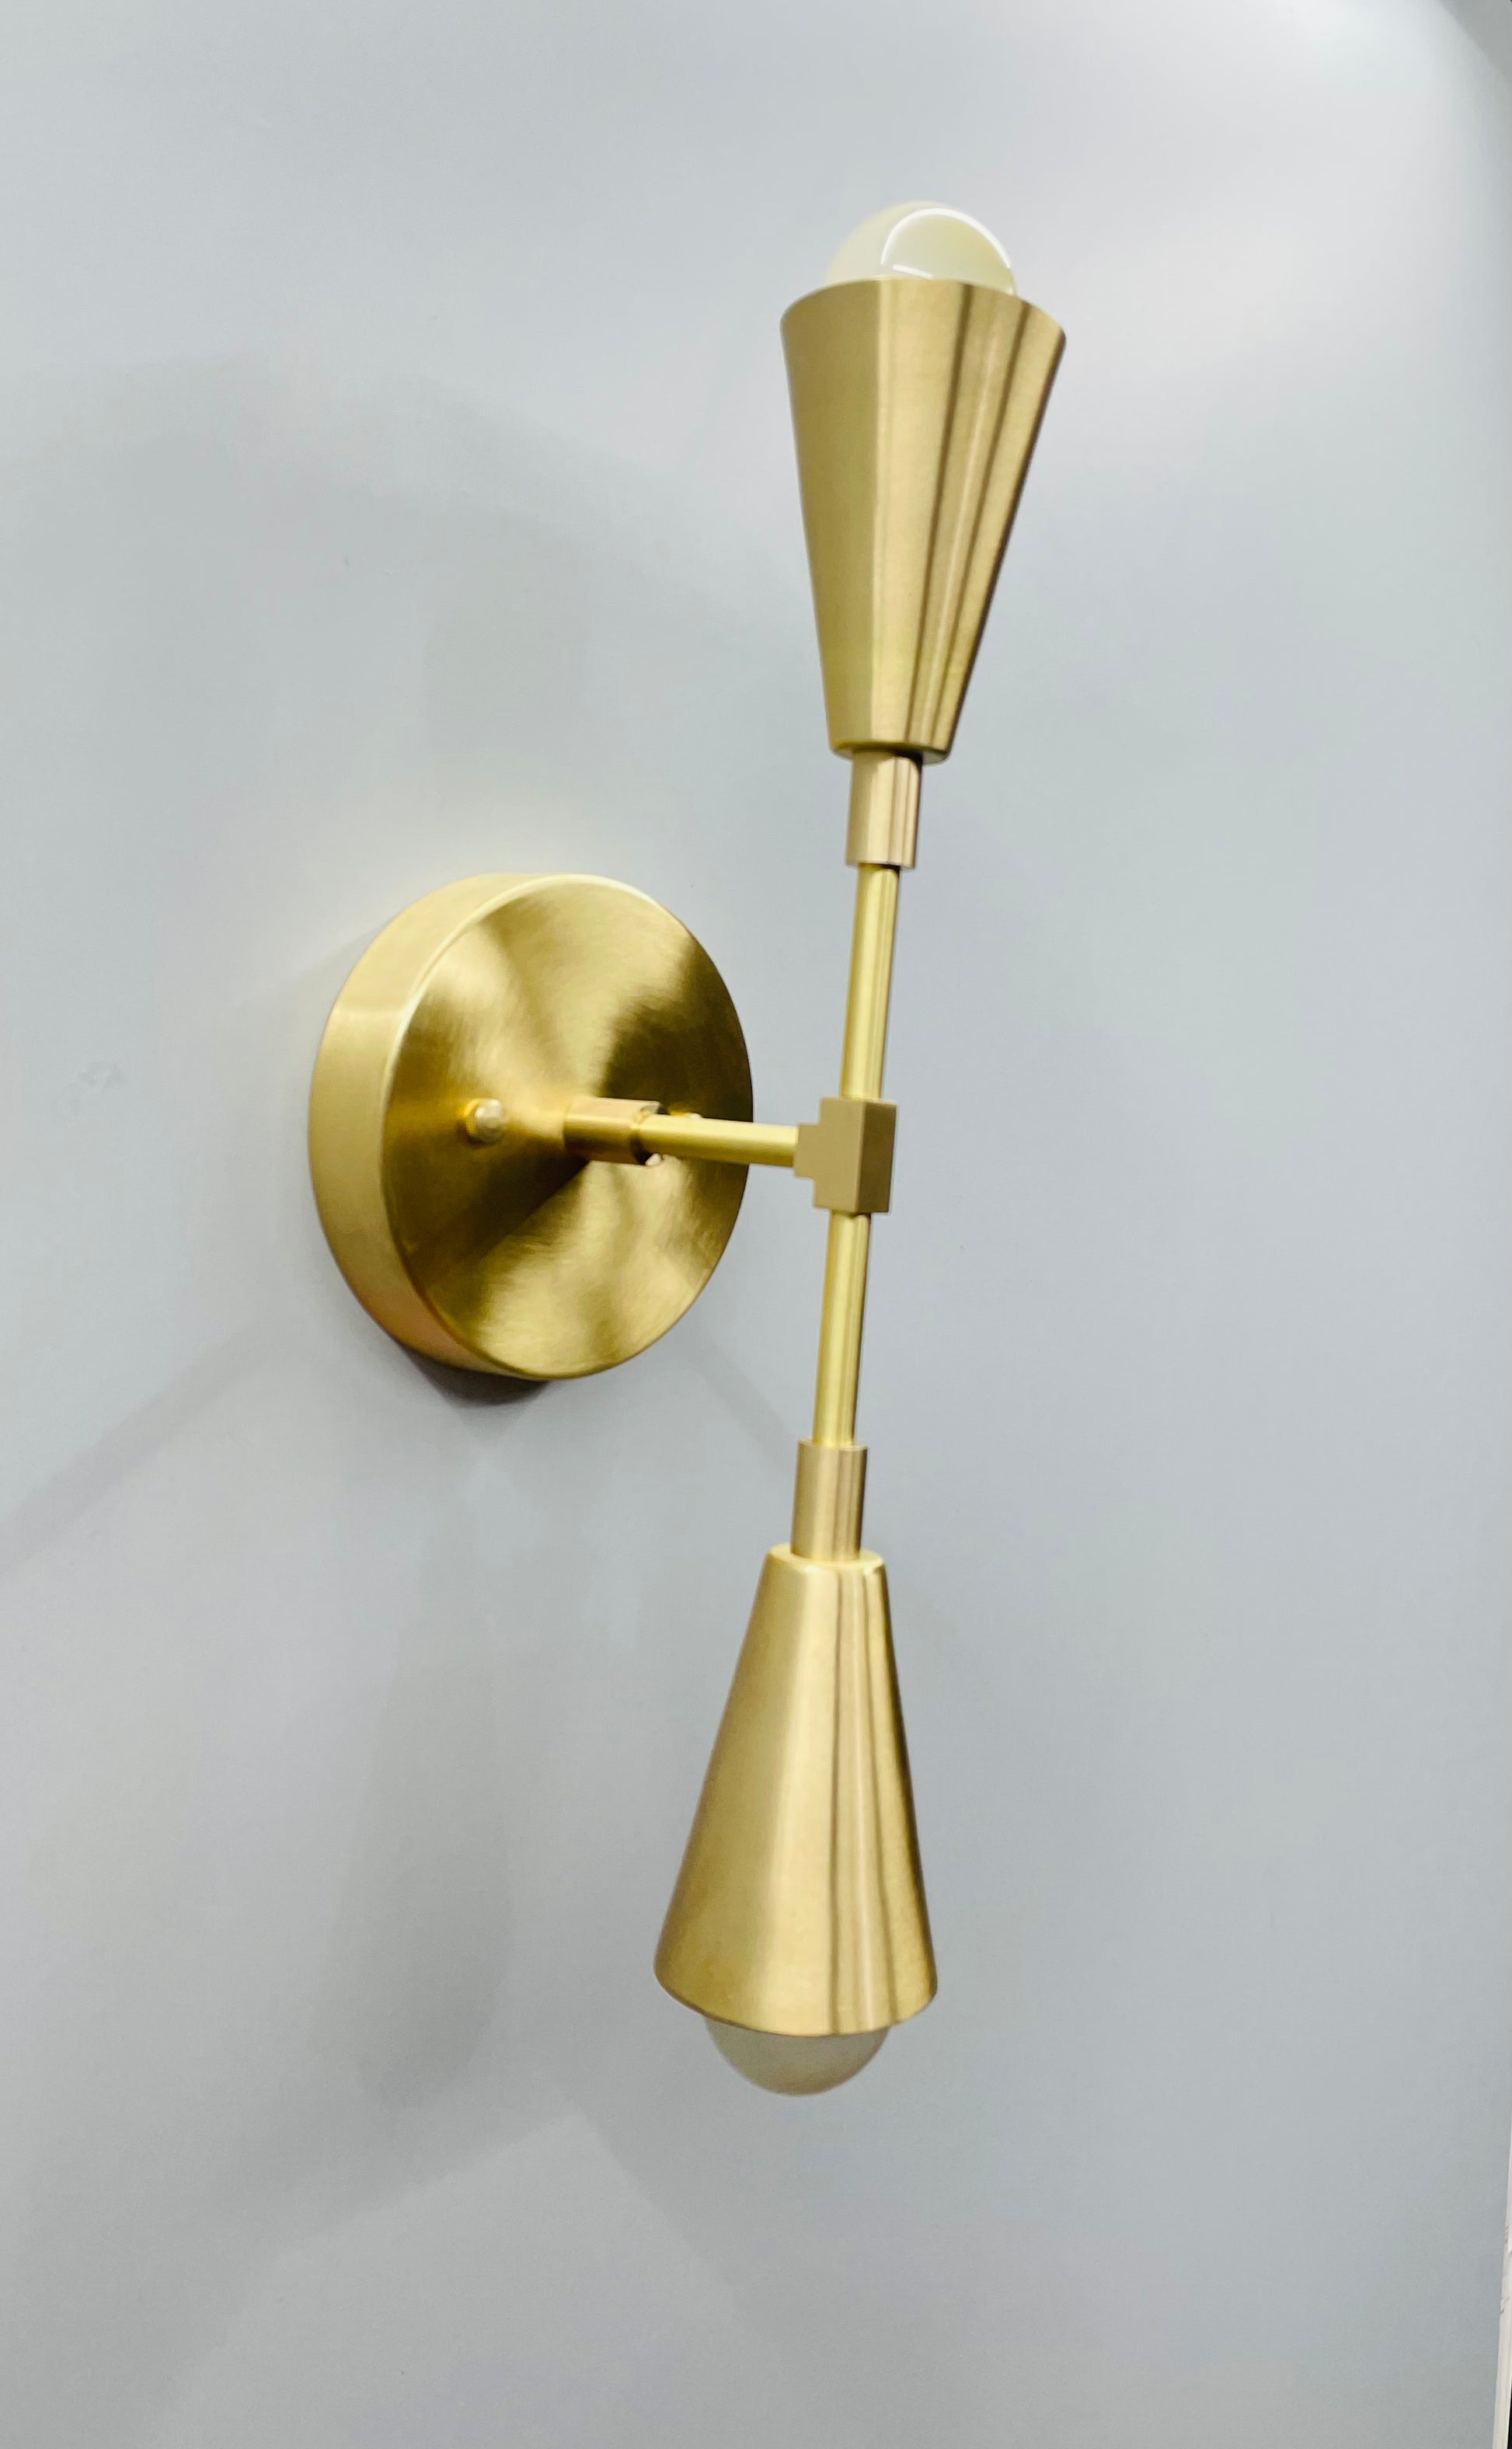 Captivating Double Cone Wall Sconce - Handcrafted Brass Construction